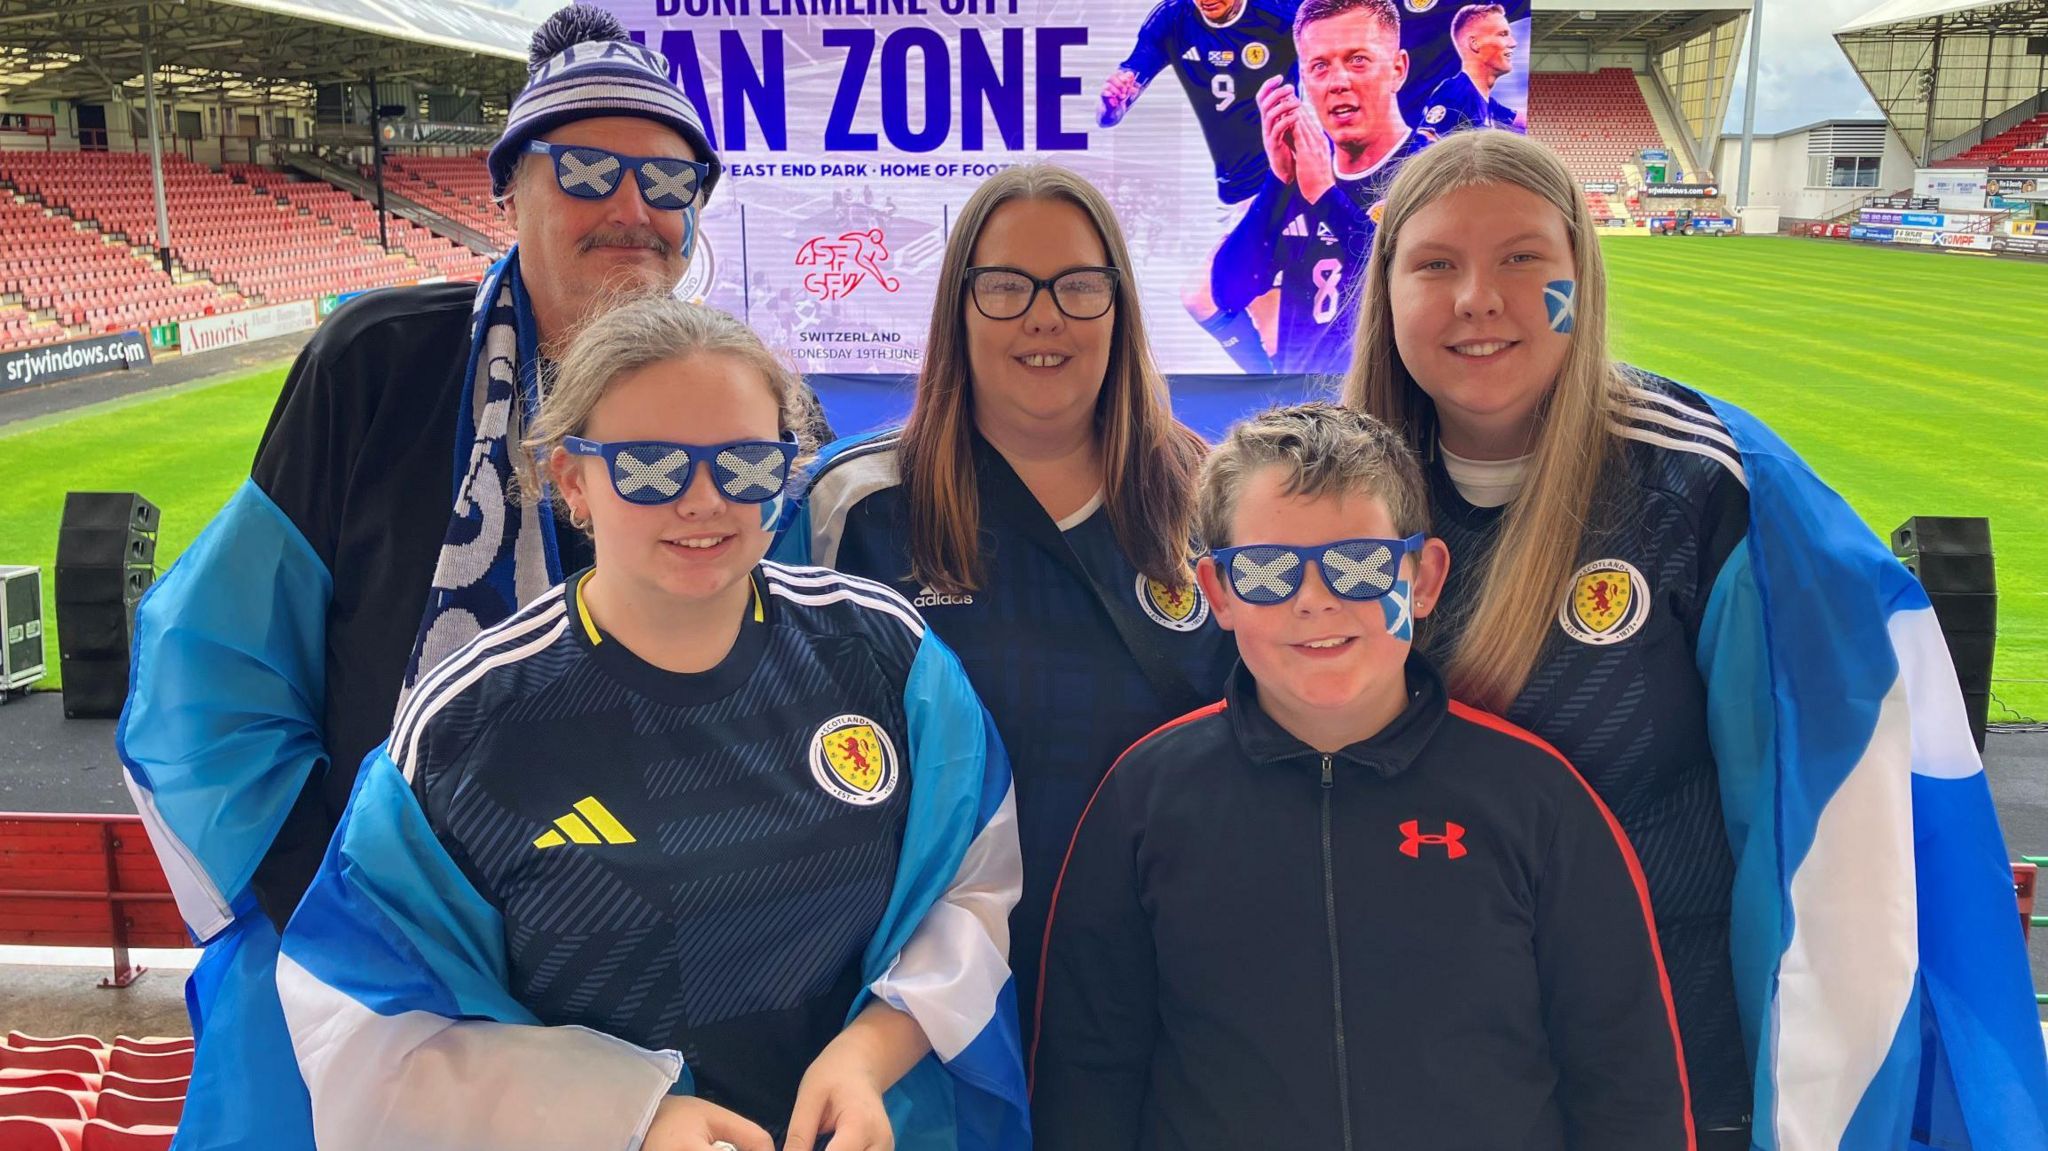 Peter Nellis with his daughter Maria and his three grandchildren in Dunfermline at the Euro 2024 fanzone